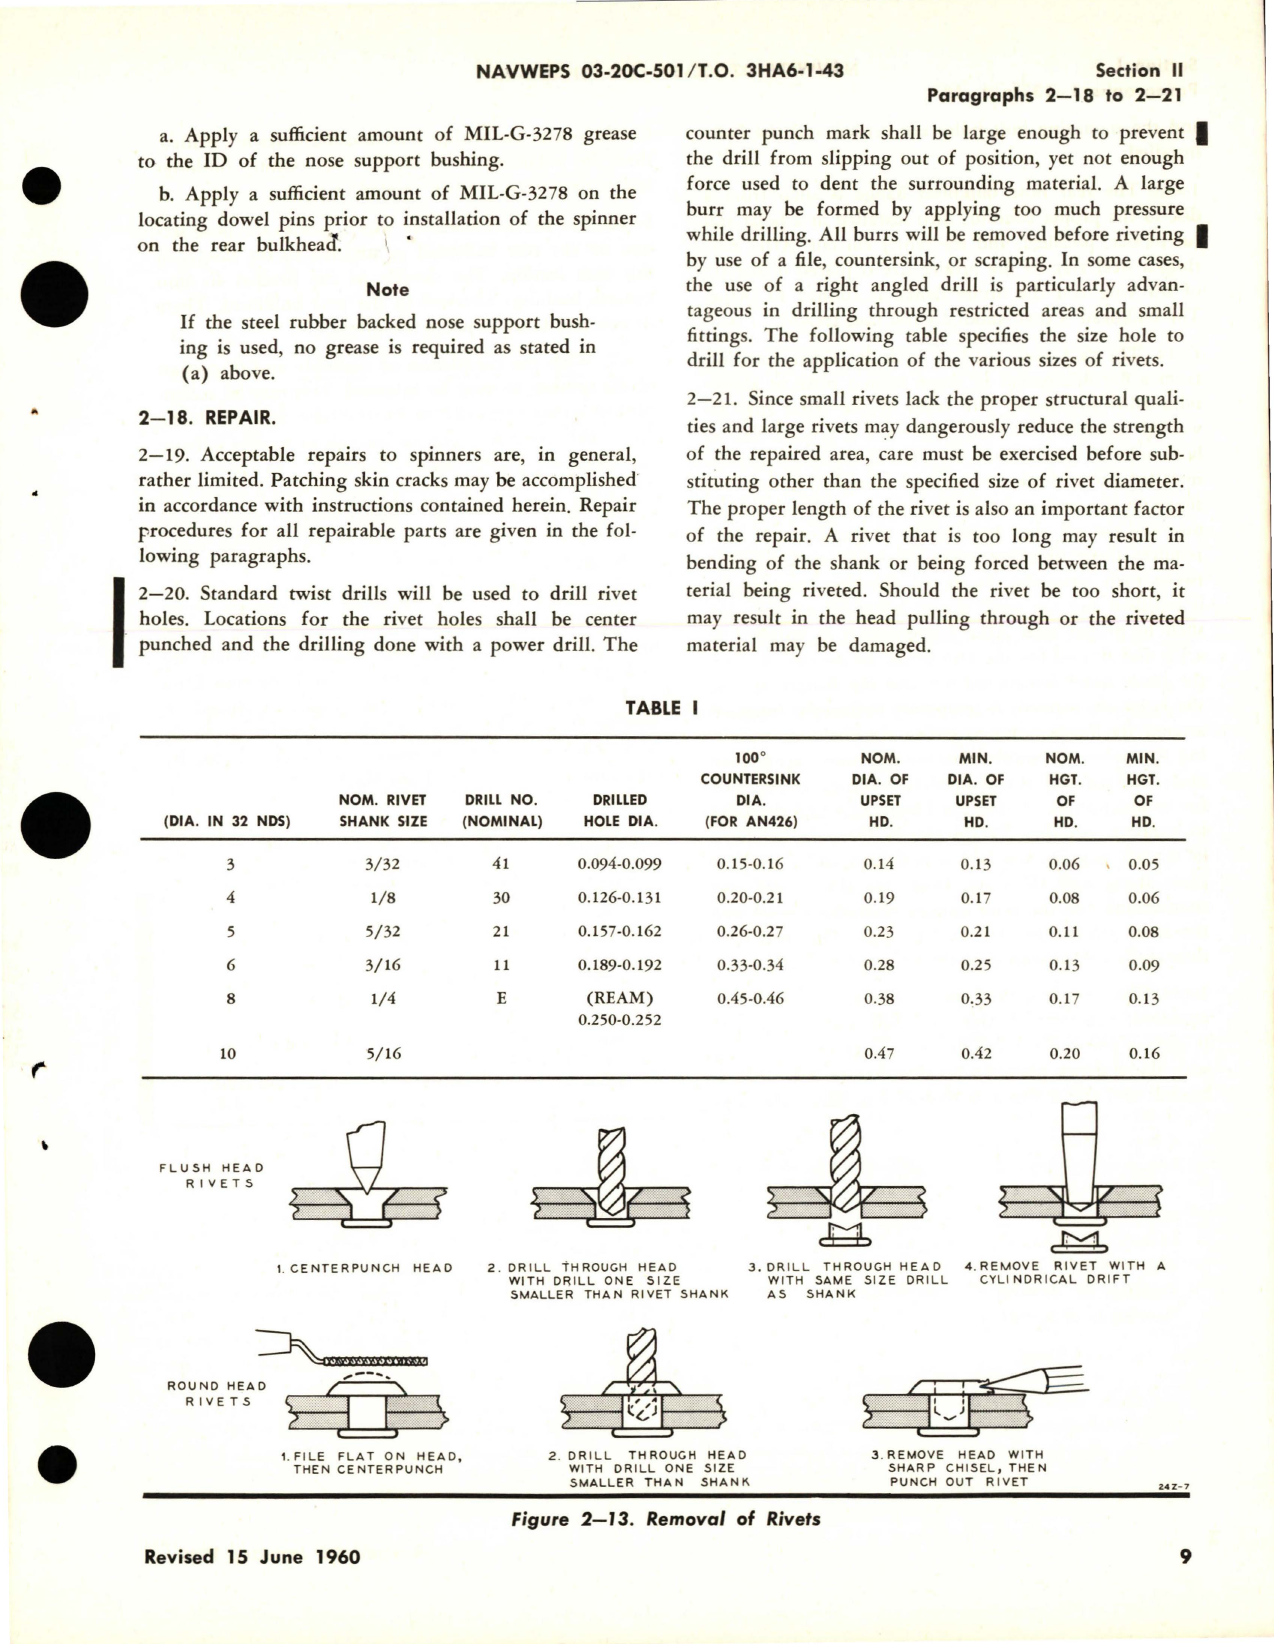 Sample page 5 from AirCorps Library document: Overhaul Instructions for Spinner Assembly